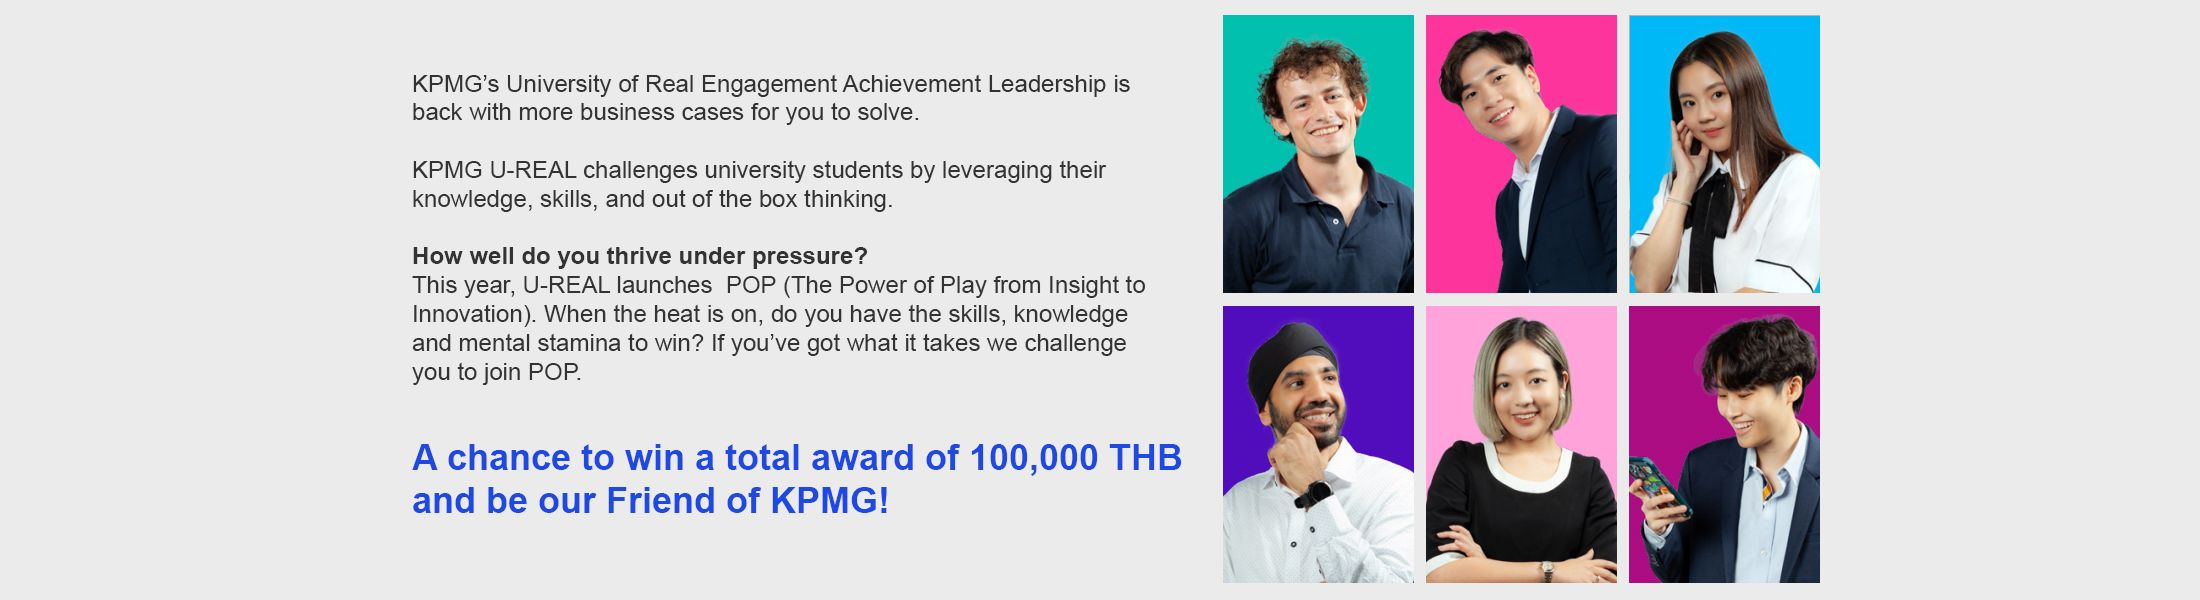 A chance to win a total award of 100,000 THB and be our Friend of KPMG!